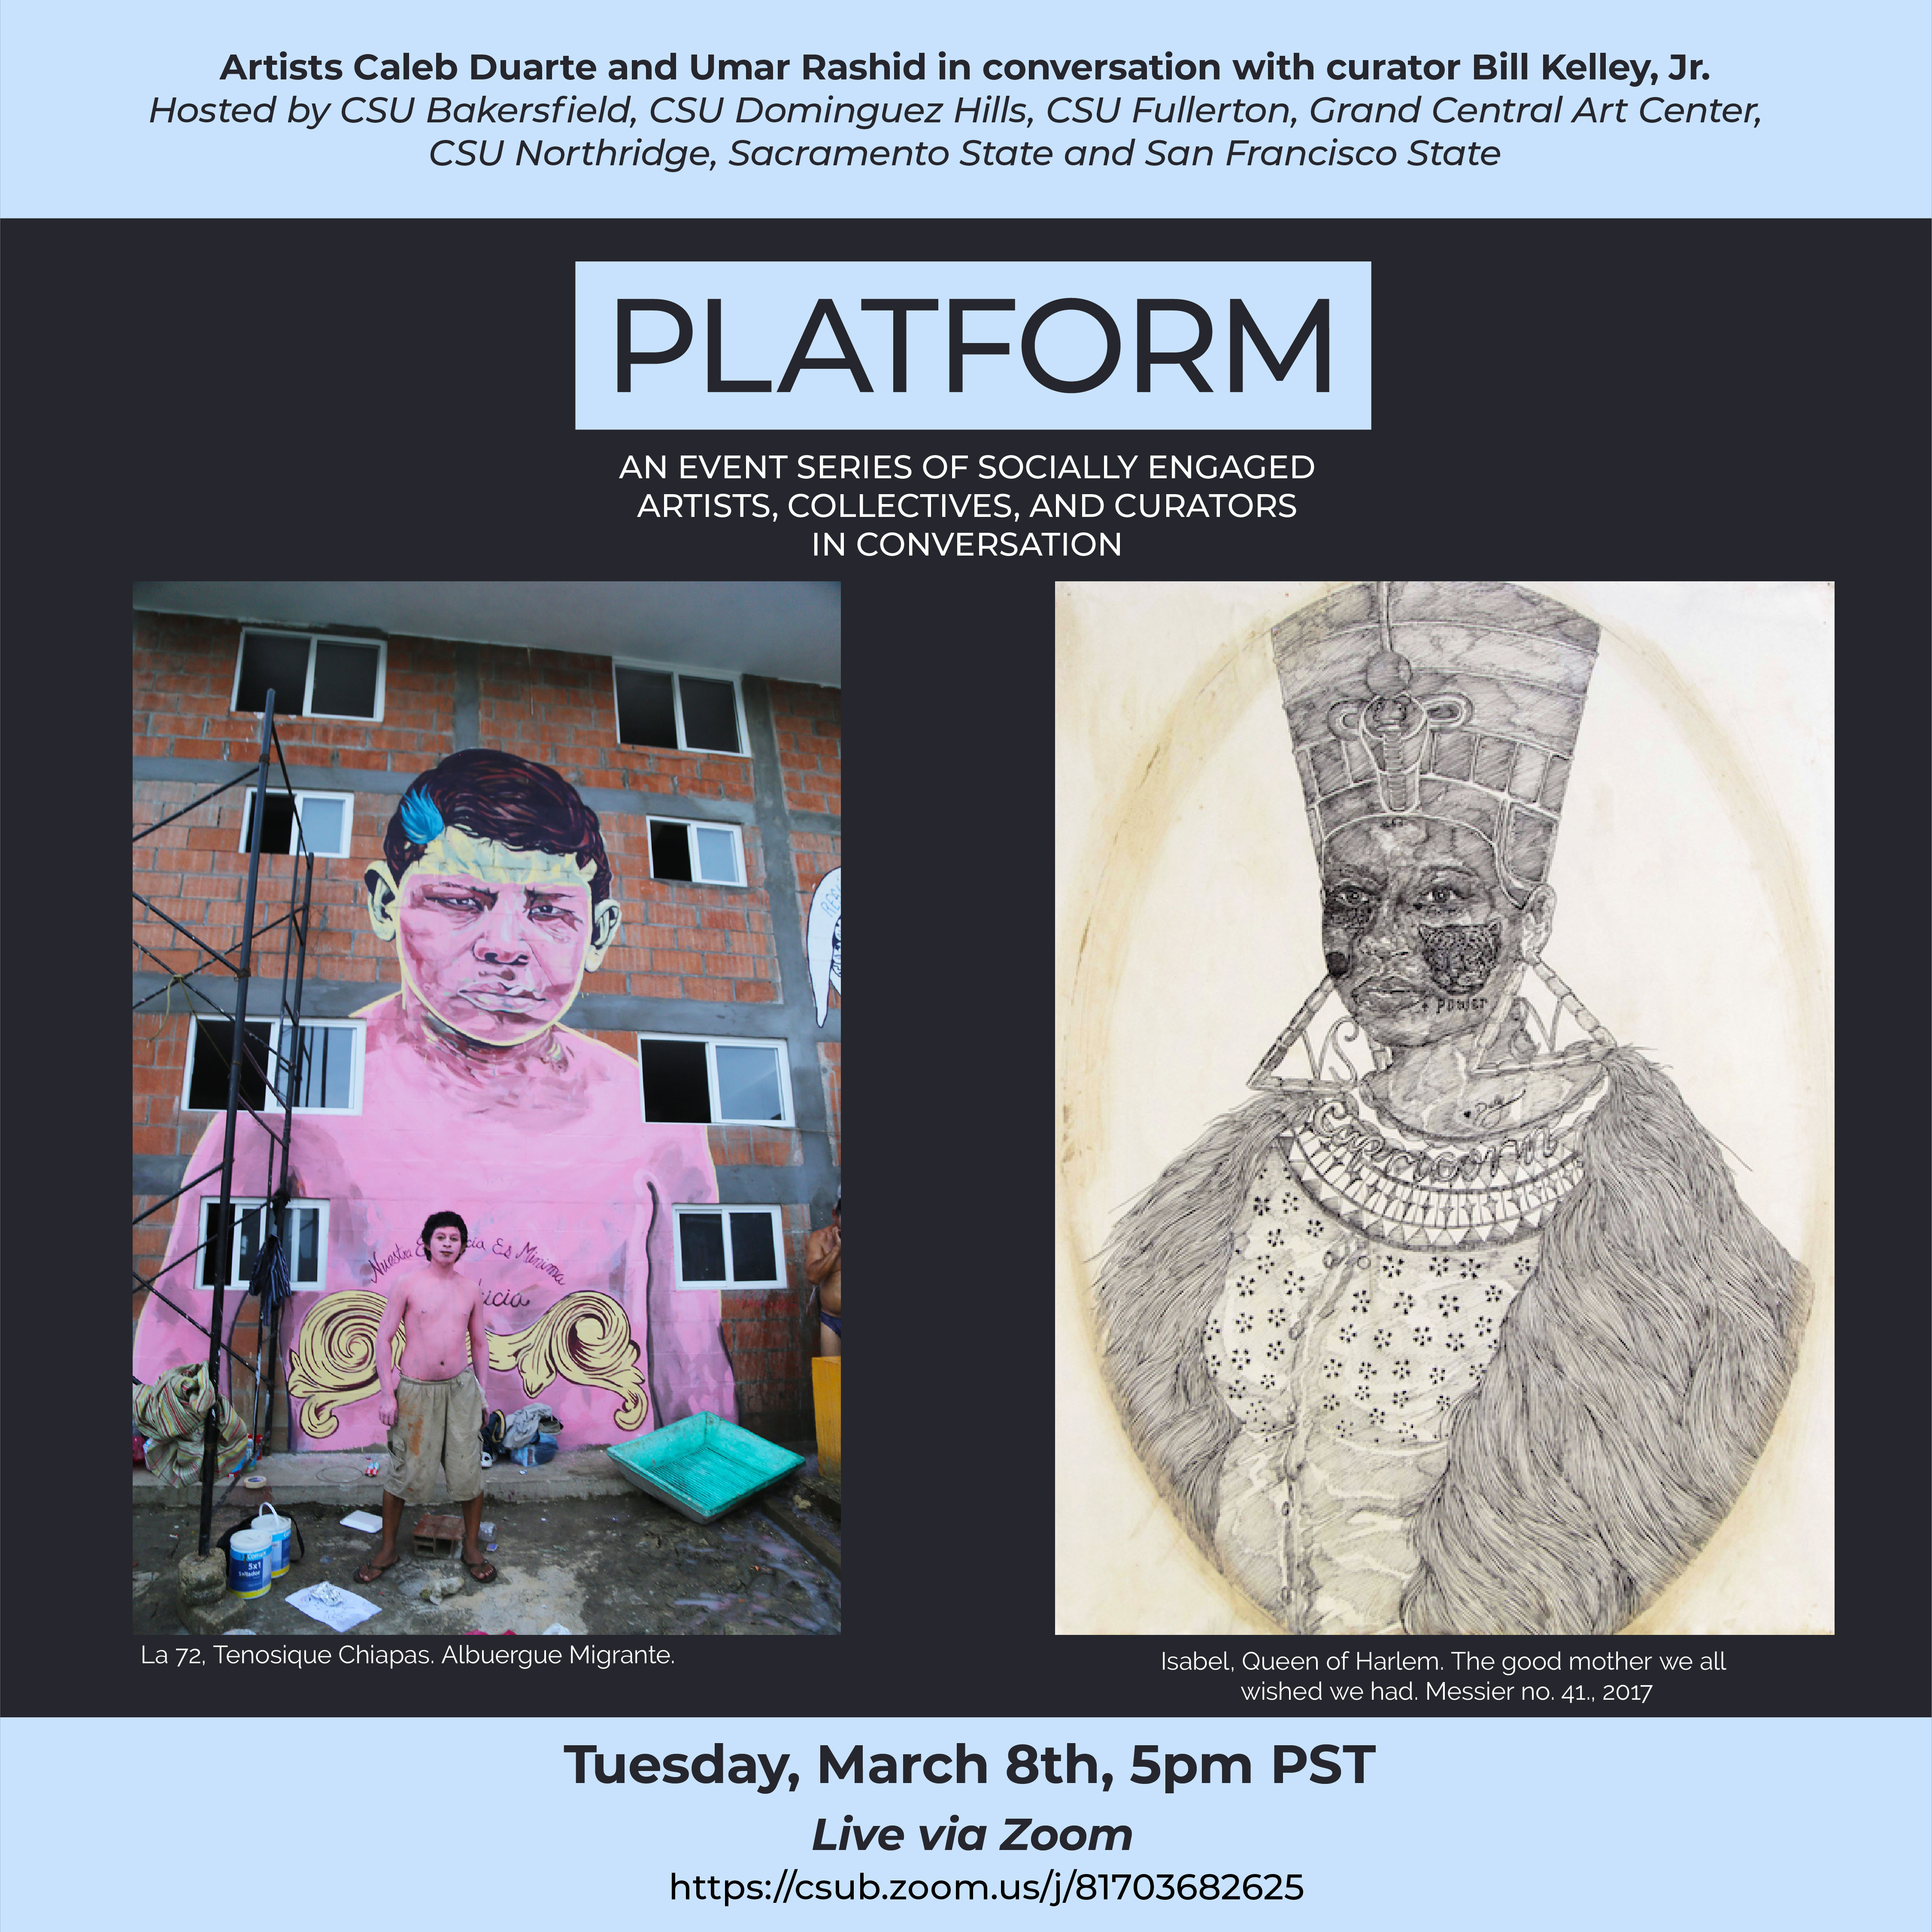 ConSortiUm’s PLATFORM online lecture series resumes with the artists Umar Rashid and Caleb Duarte, in conversation with curator Bill Kelley, Jr. It takes place Tuesday, March 8 at 5:00 p.m and will be presented live via Zoom with a recording available for post-live-stream viewing. The event is free and open to the public